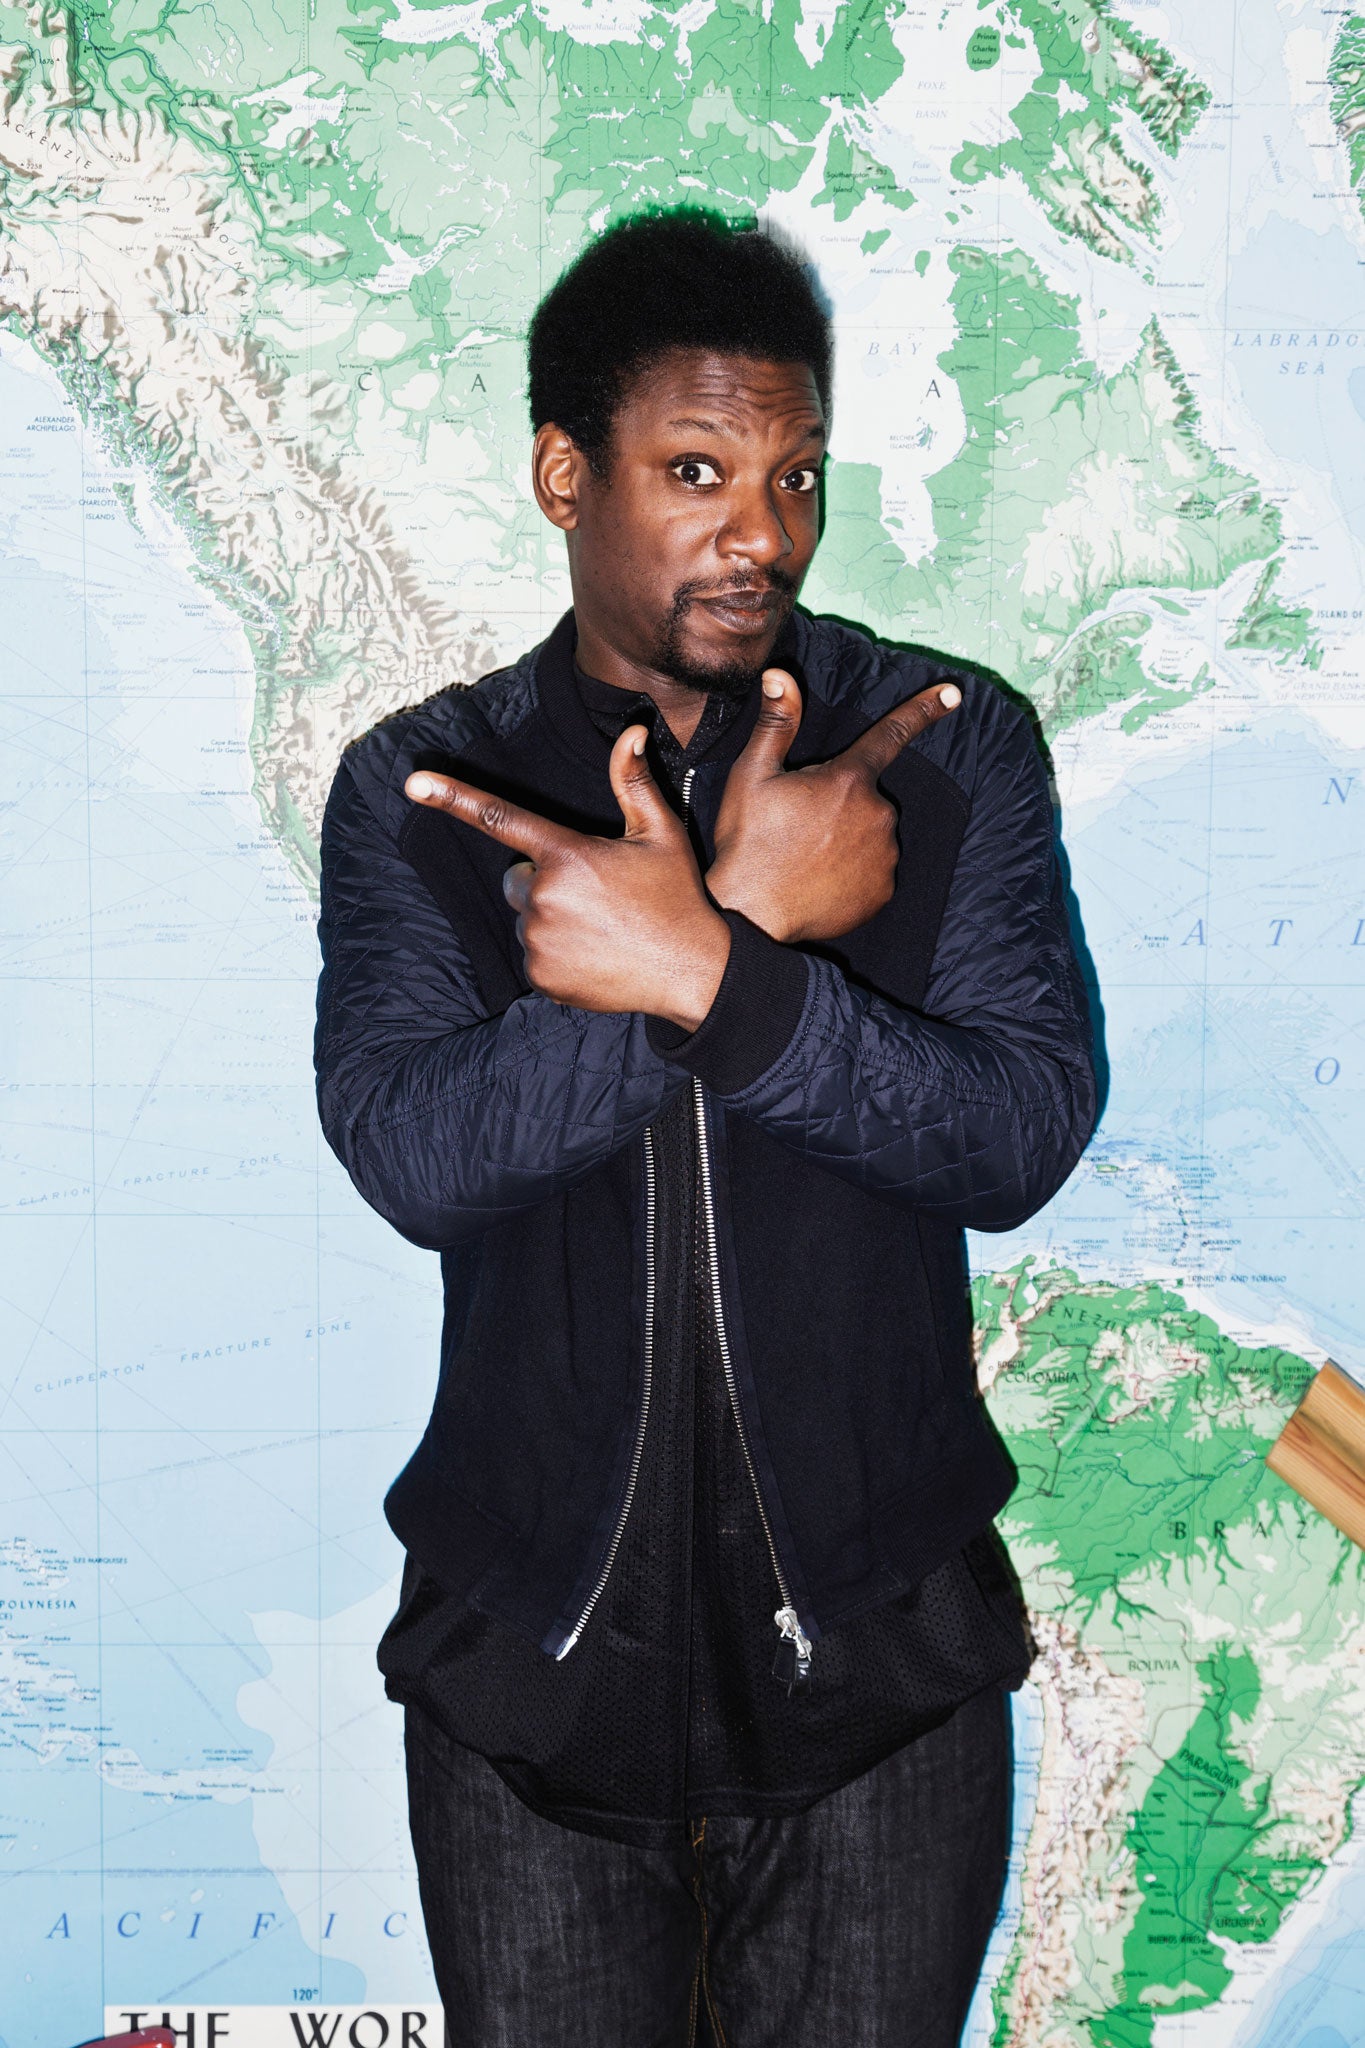 Thanks to his global fanbase, Manuva's albums sell hundreds of thousands, but he remains an outsider